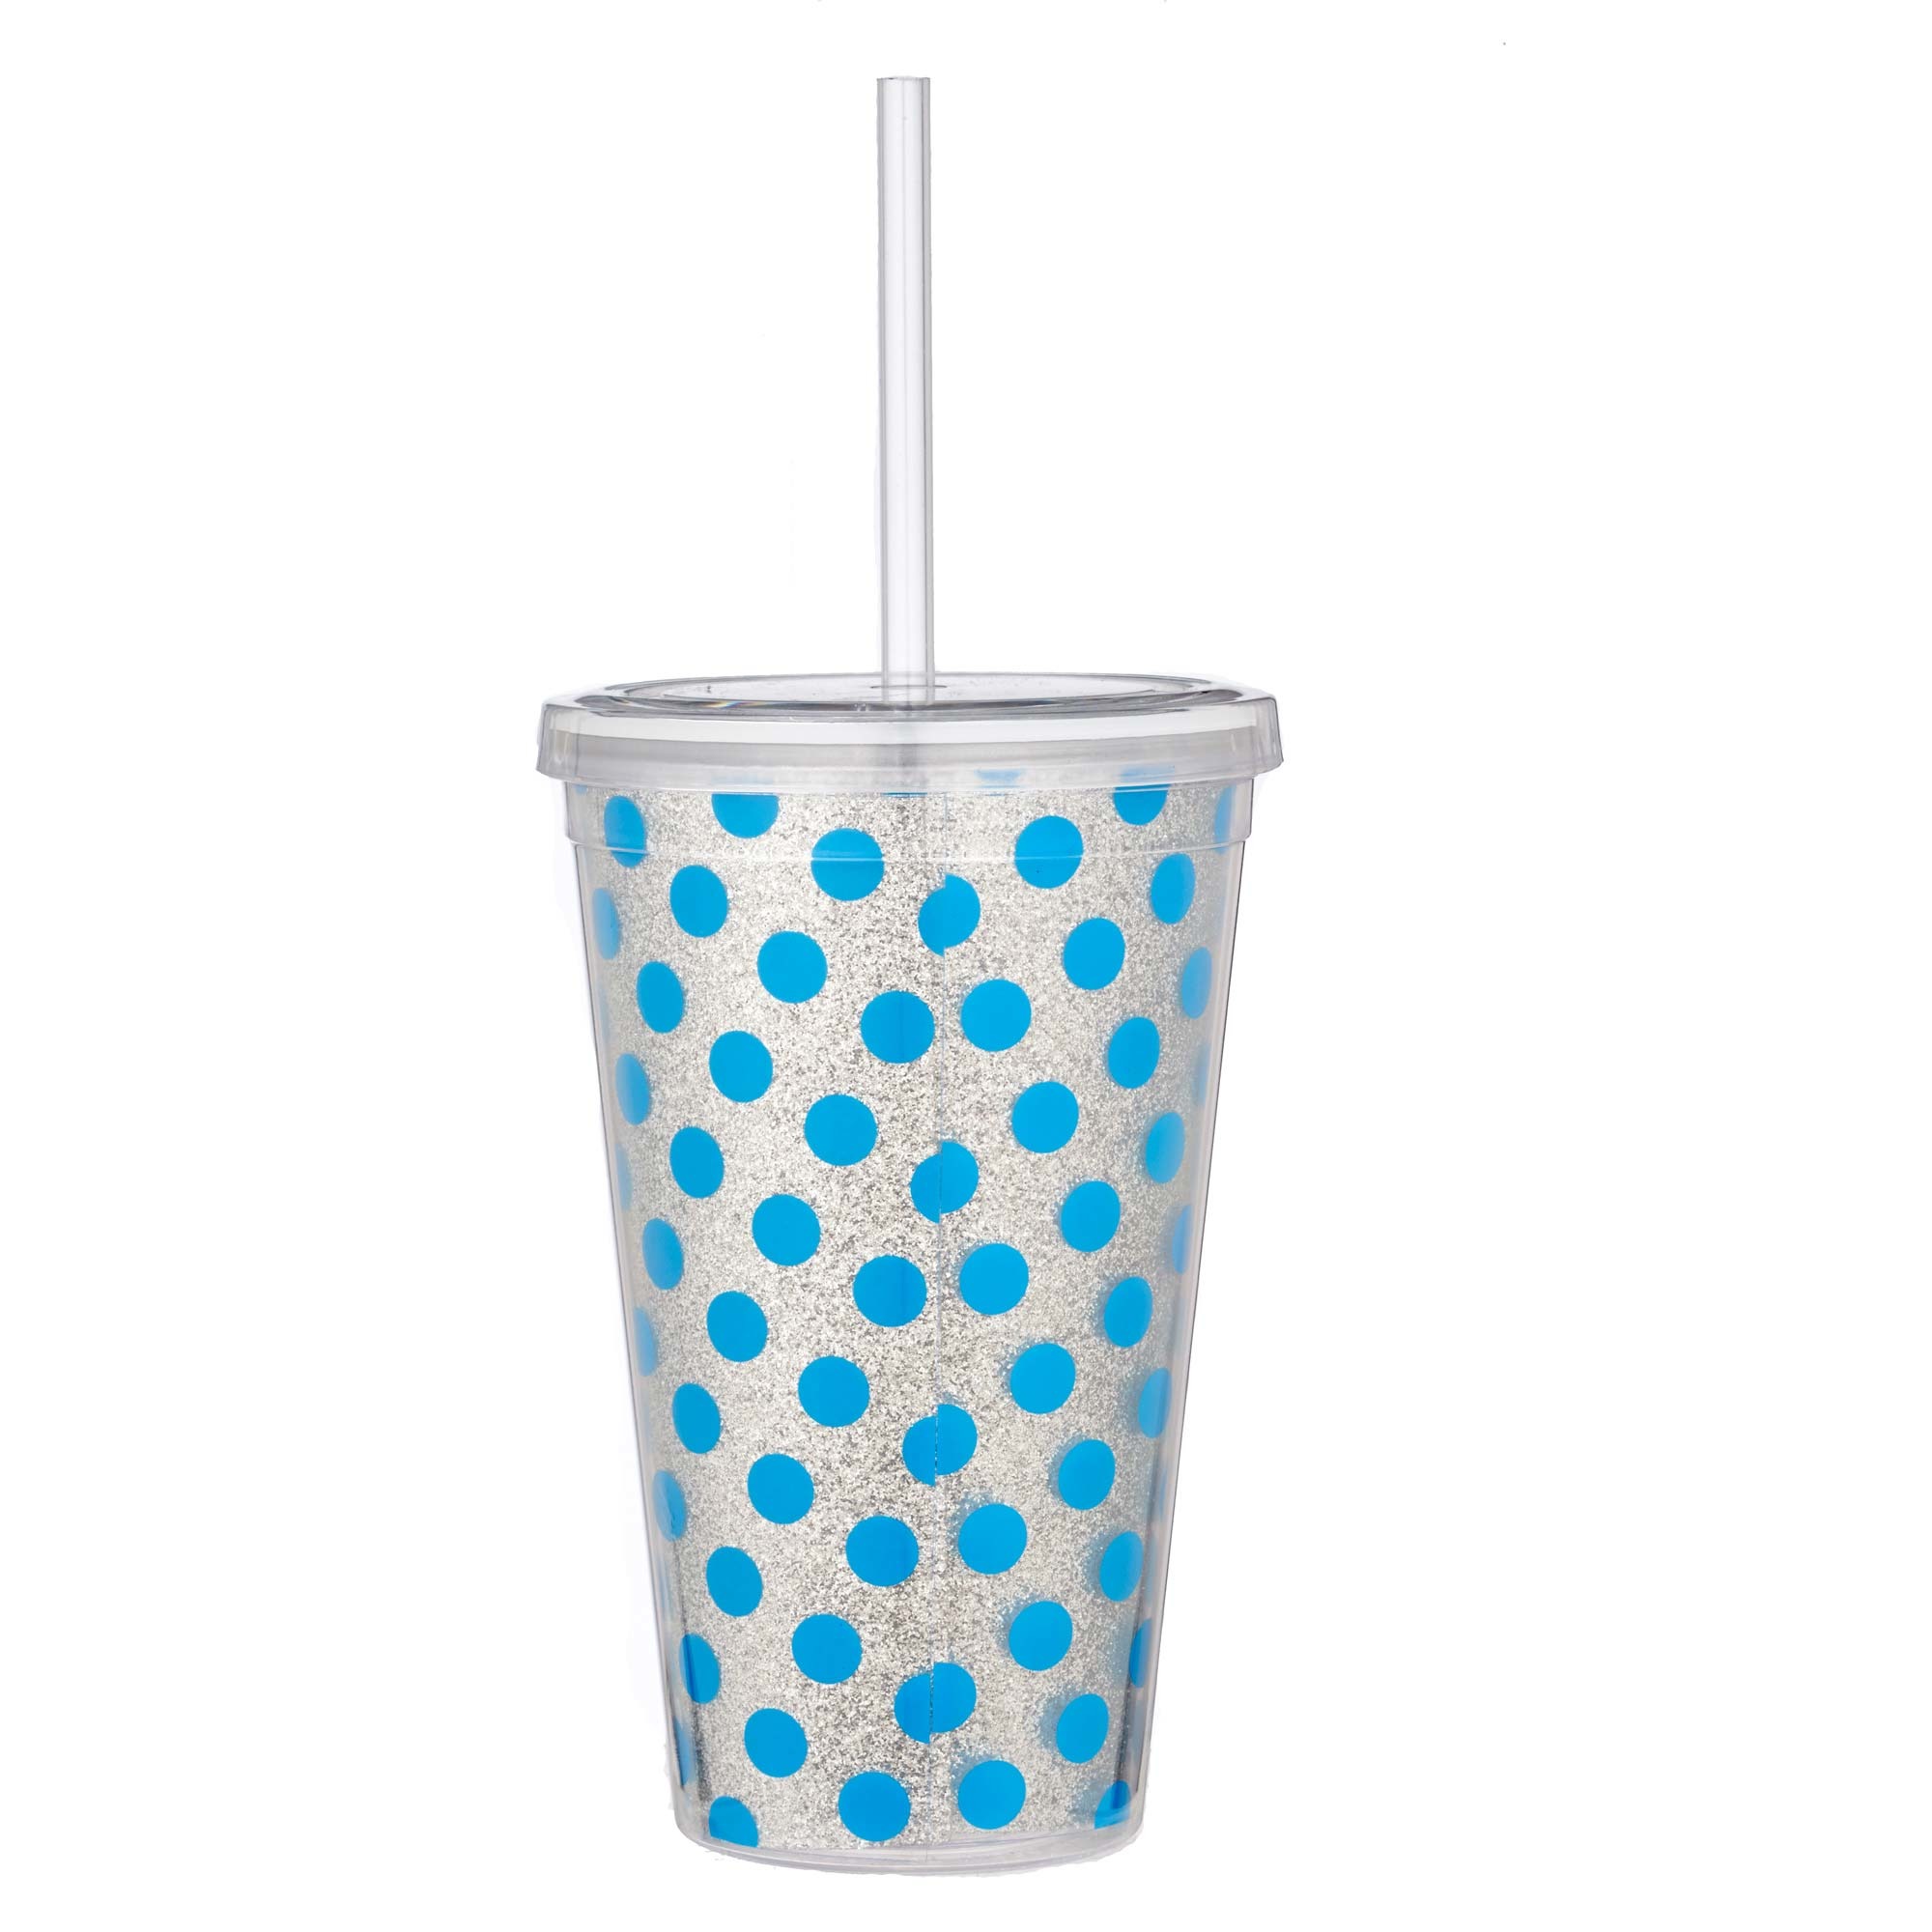 Betty Boop Blue with Glitter Tumbler Cup by Britto - Artreco